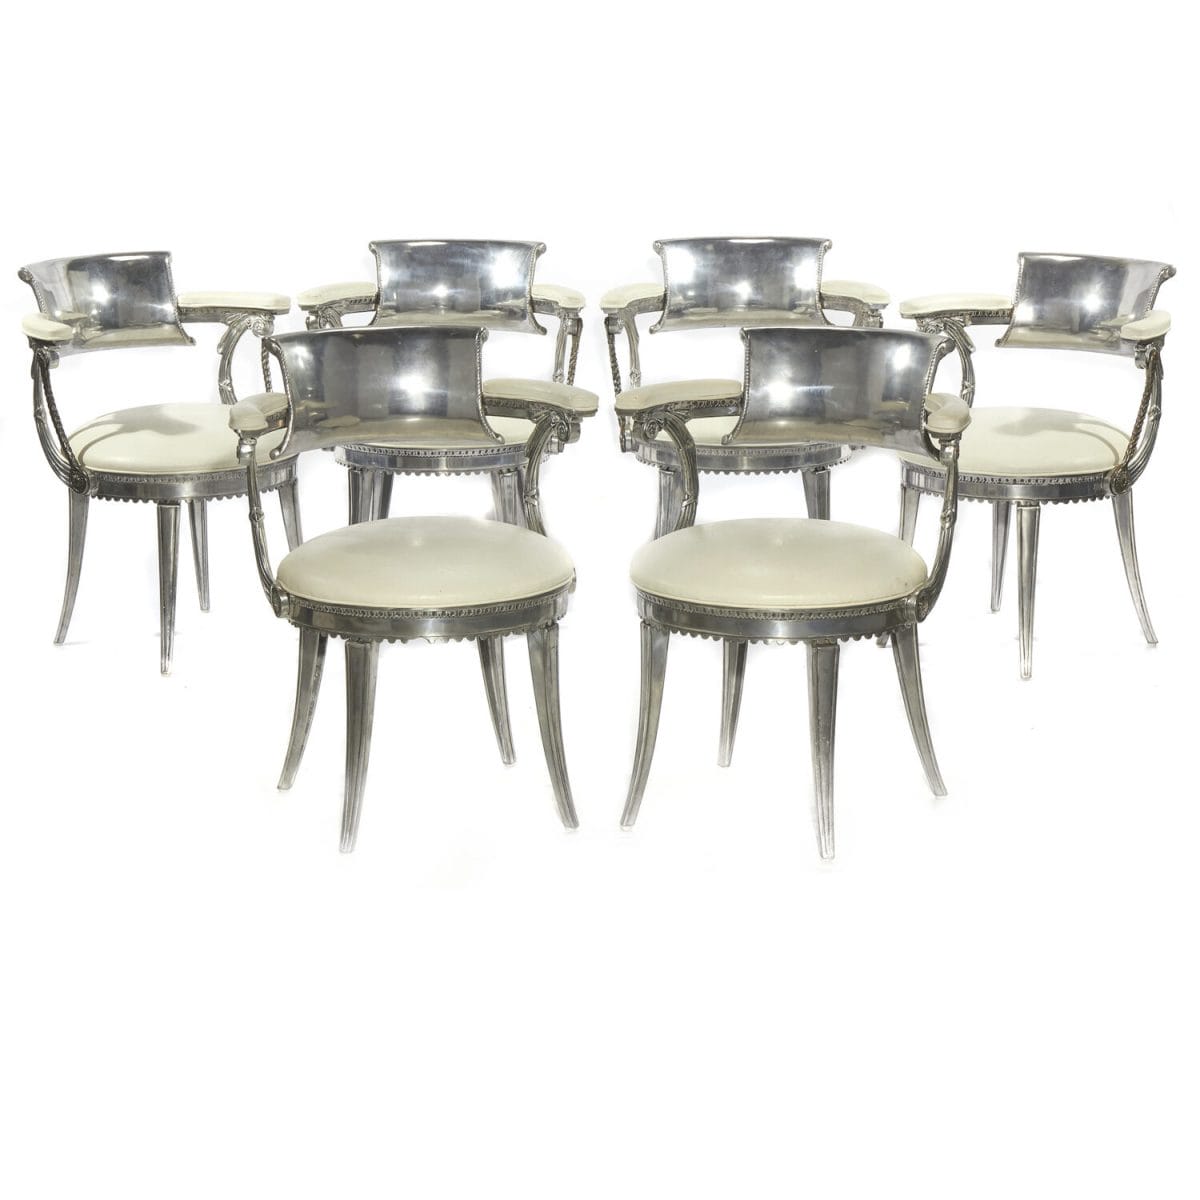 <p><a href="https://auctions.finesf.com/online-auctions/fine-estate-inc/six-art-deco-dorothy-draper-design-chairs-3091441">Dorothy Draper Chairs Available at Auction on July 24th 11am</a></p>